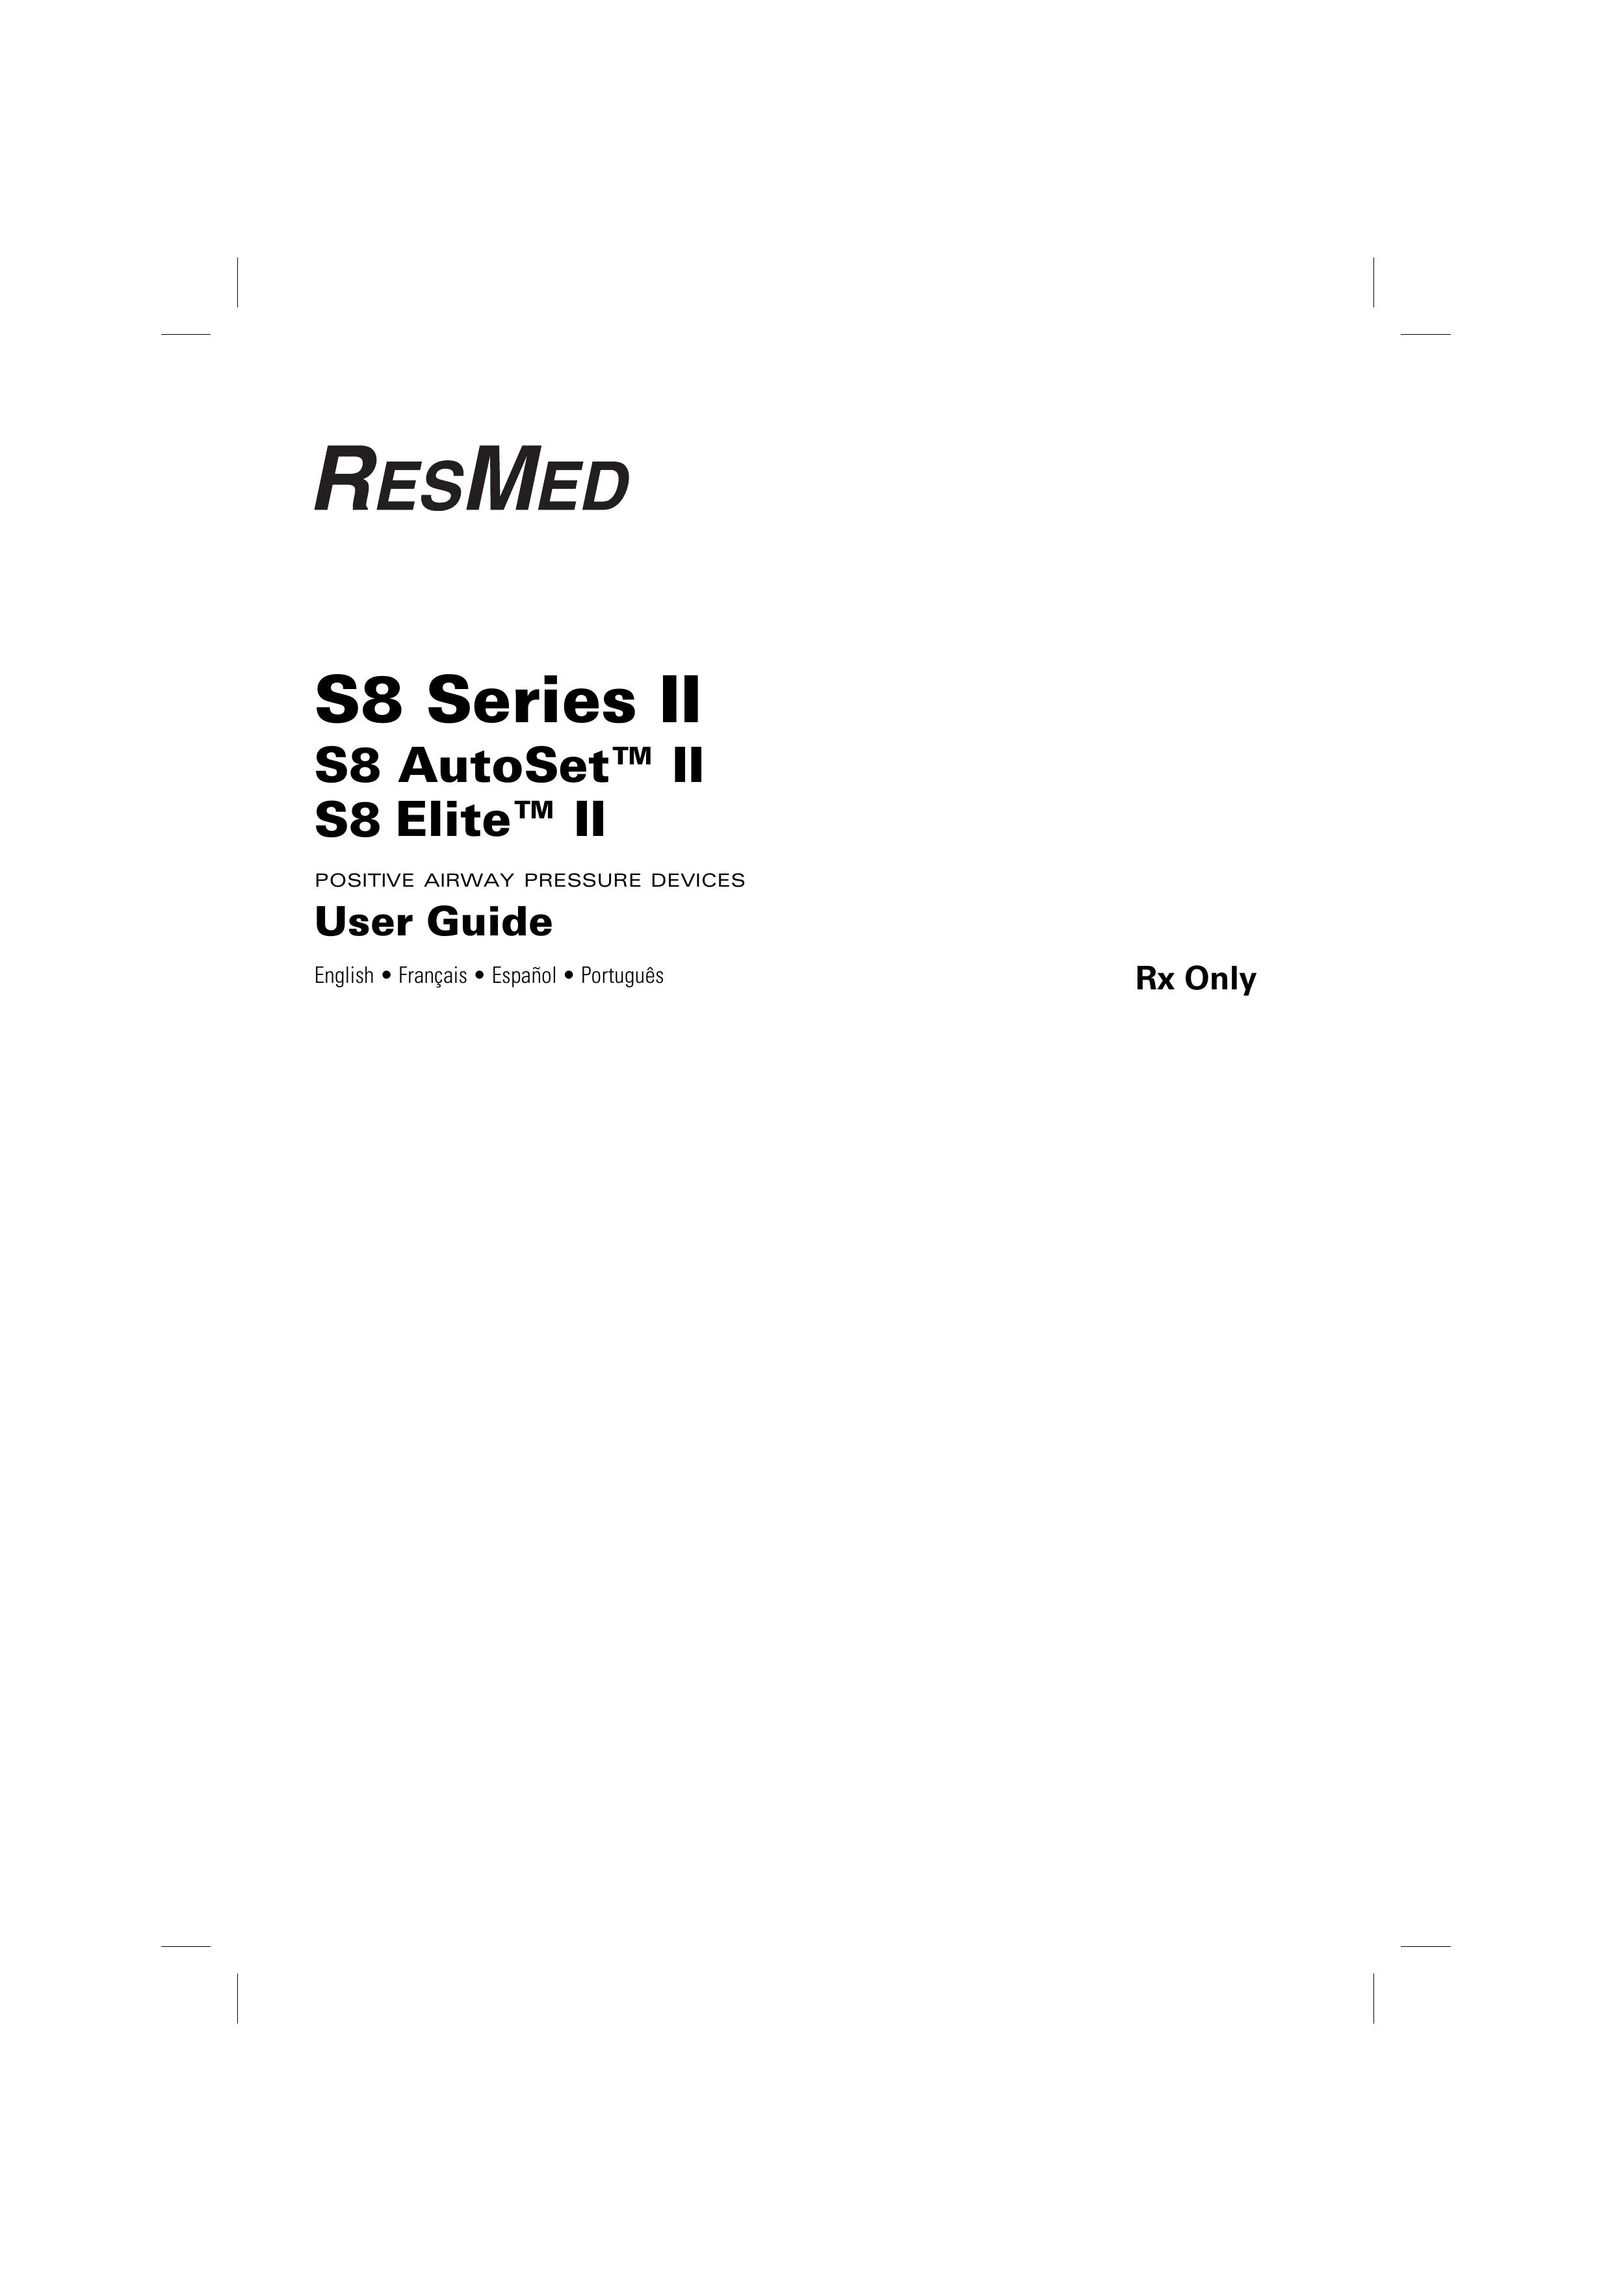 ResMed S8 CRT Television User Manual